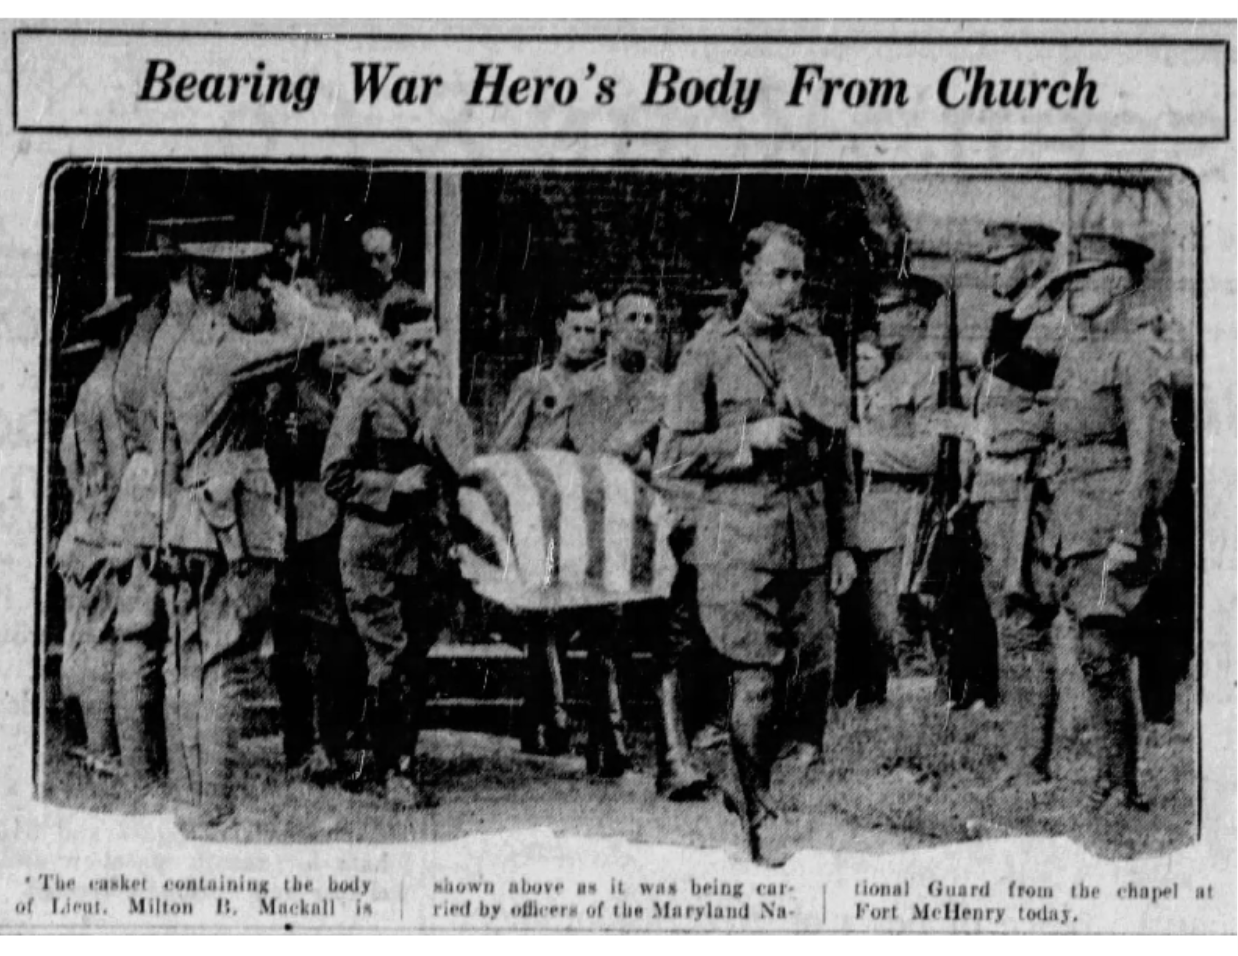 A black and white newspaper clipping showing soldiers carrying a coffin with an American flag on it with the headline "Bearing War Hero's Body From Church."